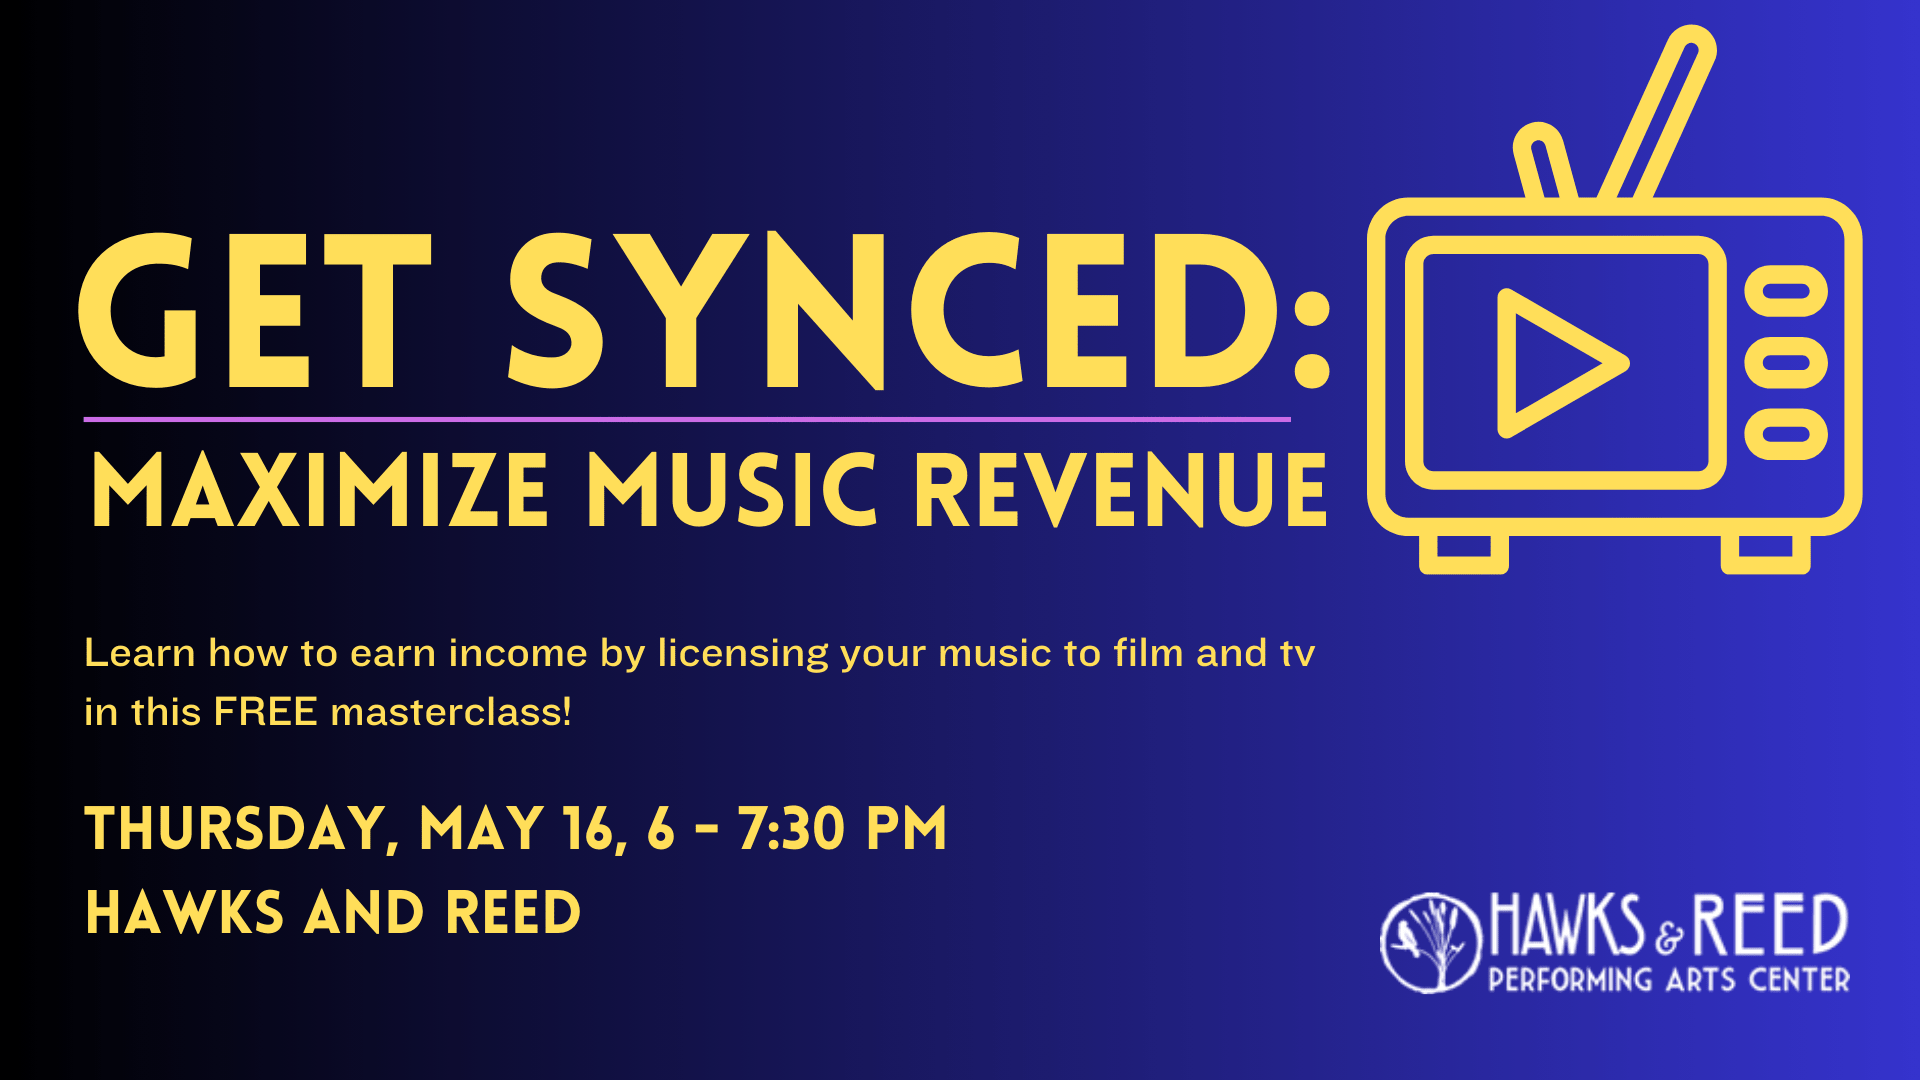 Get Synced: Maximize Music Revenue!